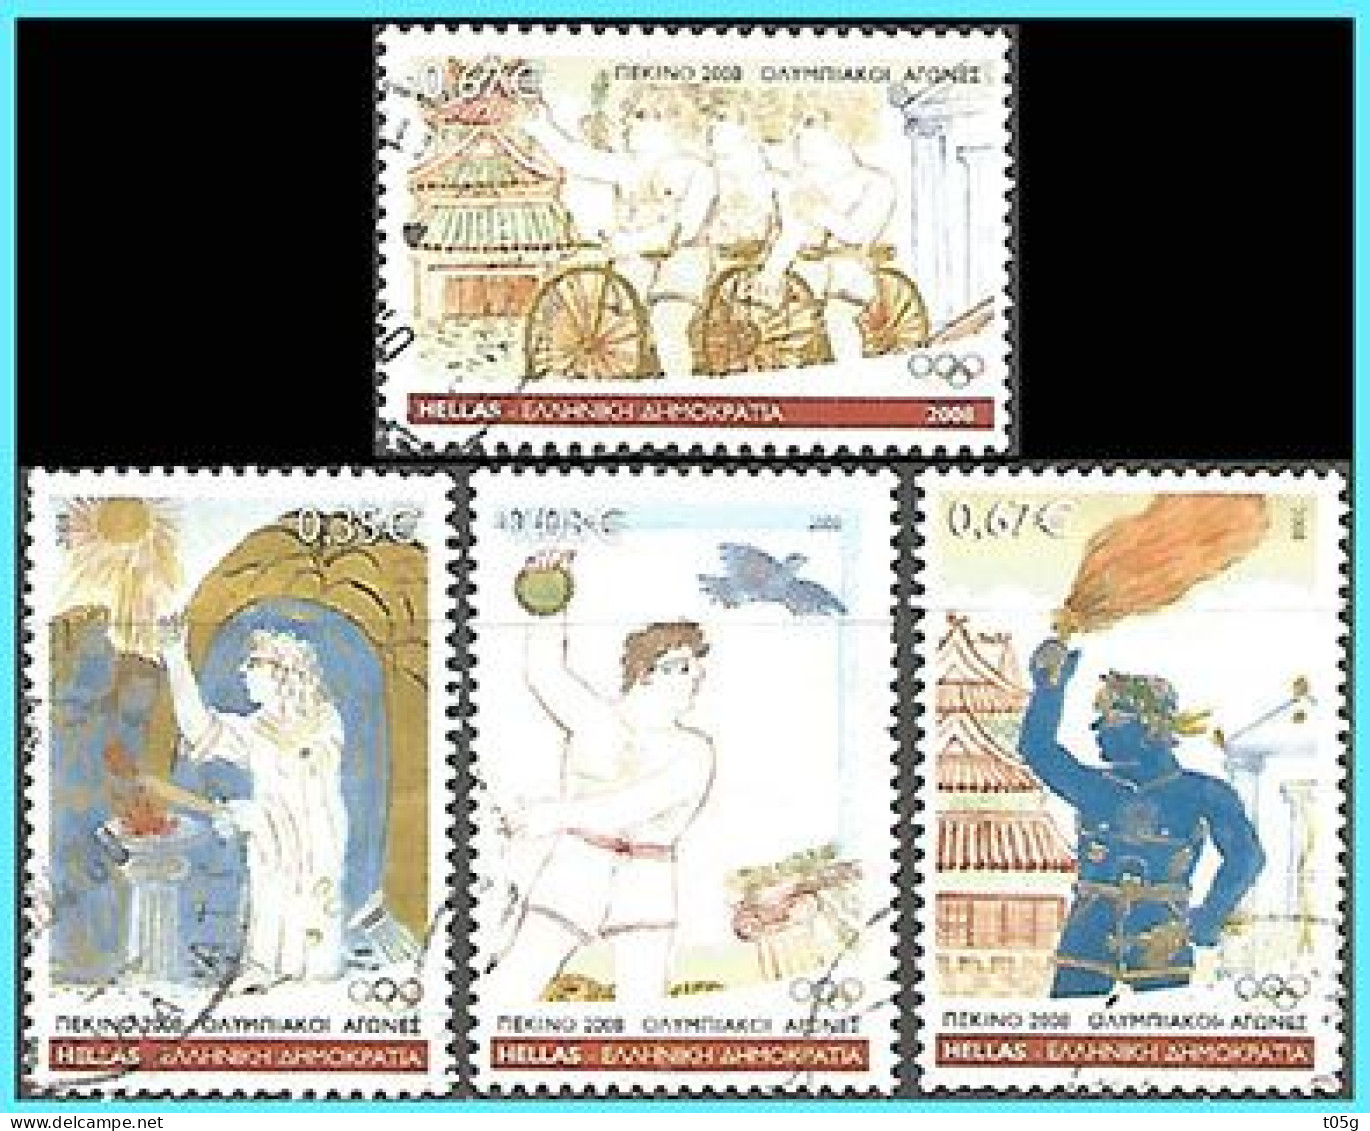 GREECE-GRECE-HELLAS 2008: Compl Set Used - Used Stamps